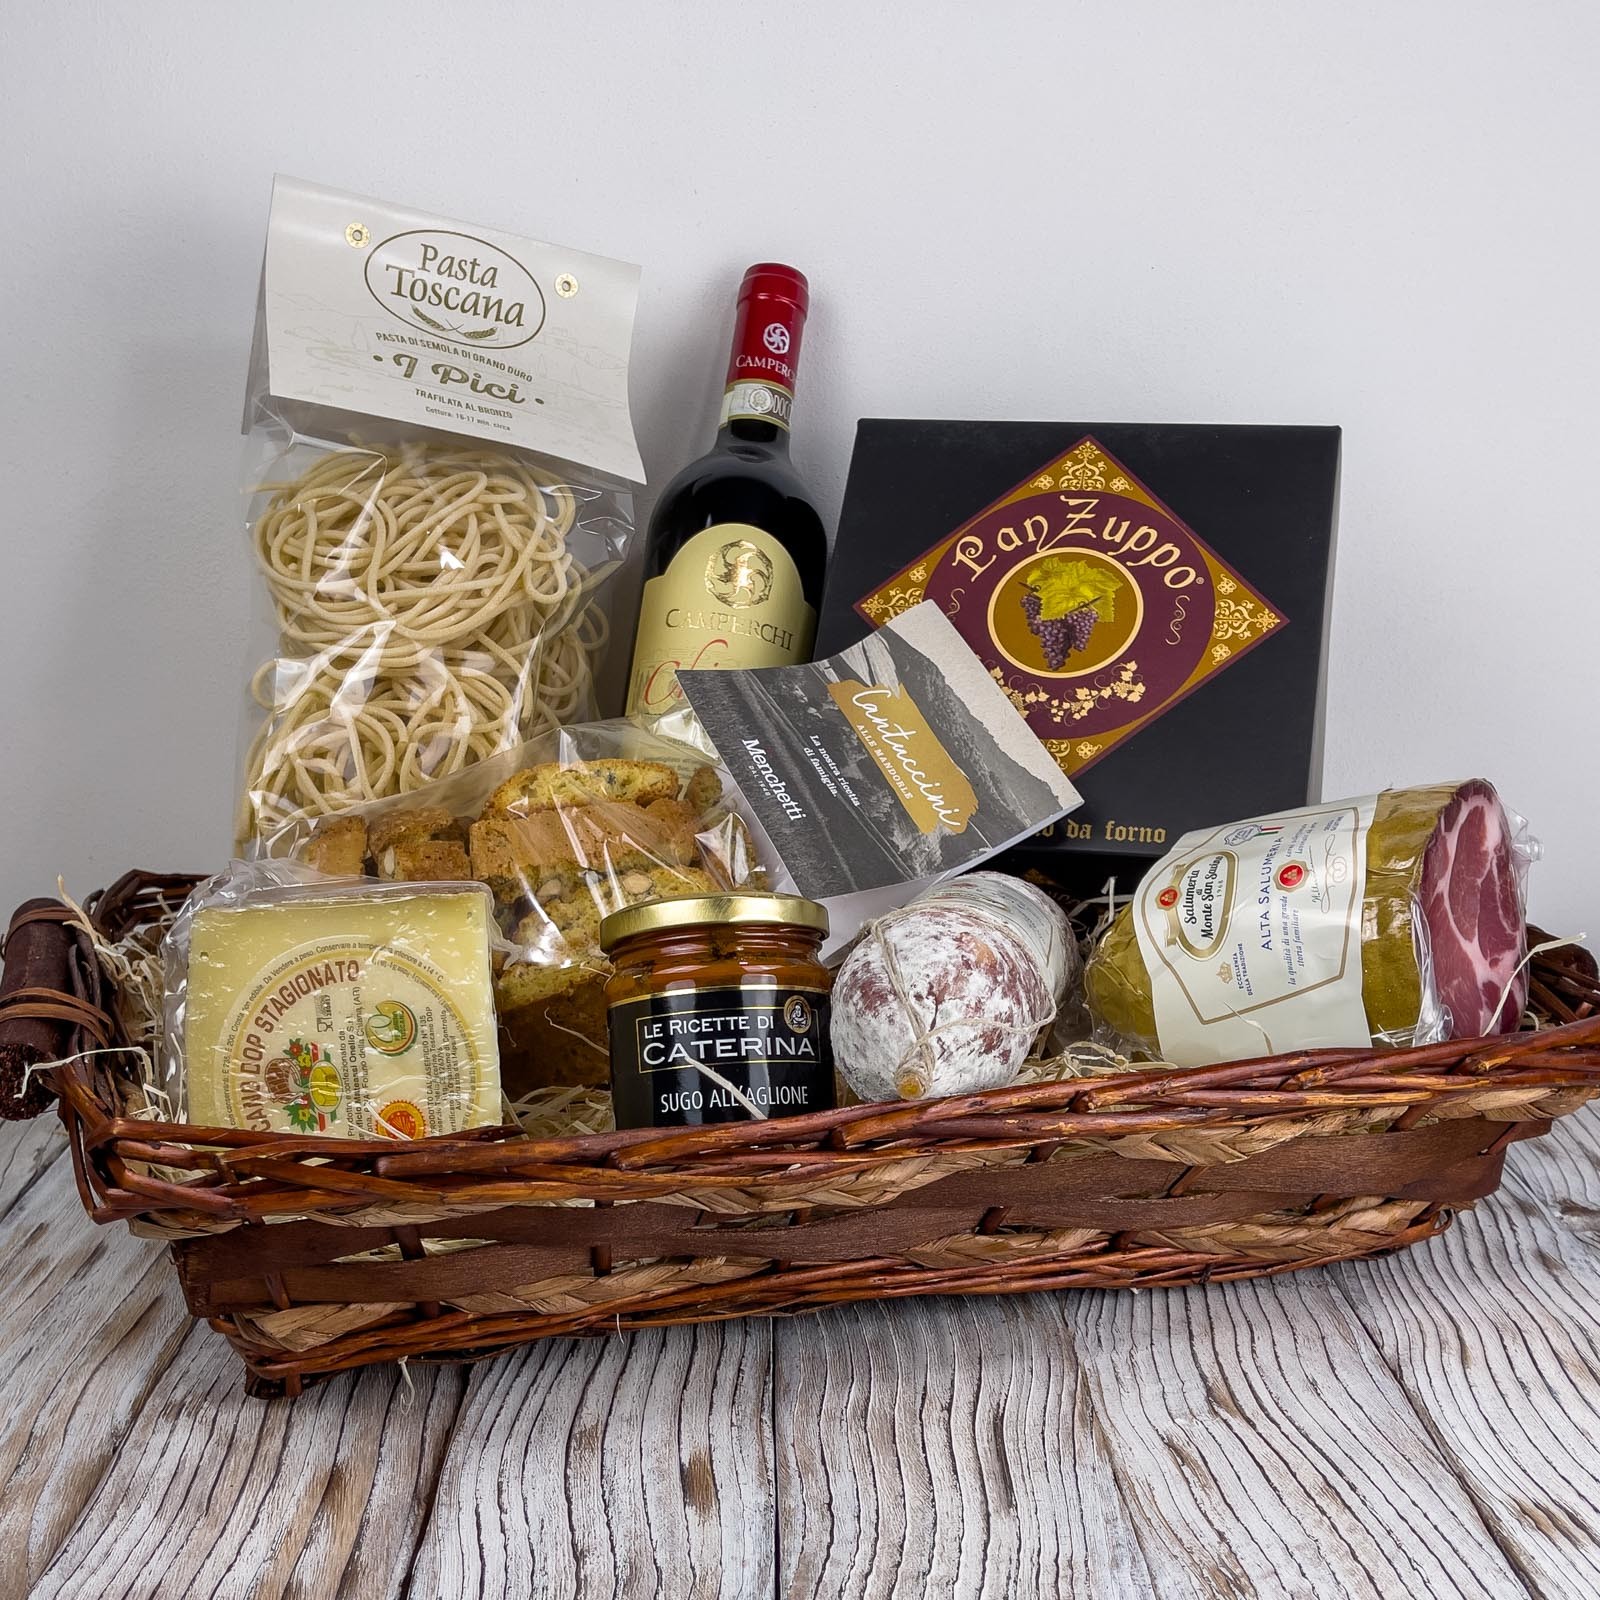 Gift Hamper consisting of a selection of 8 products for a total of about 4 kg. We will pack the basket and ship it wherever you want, there is also the possibility of adding a personalized card with a message.
For more information or product changes contact us in chat.